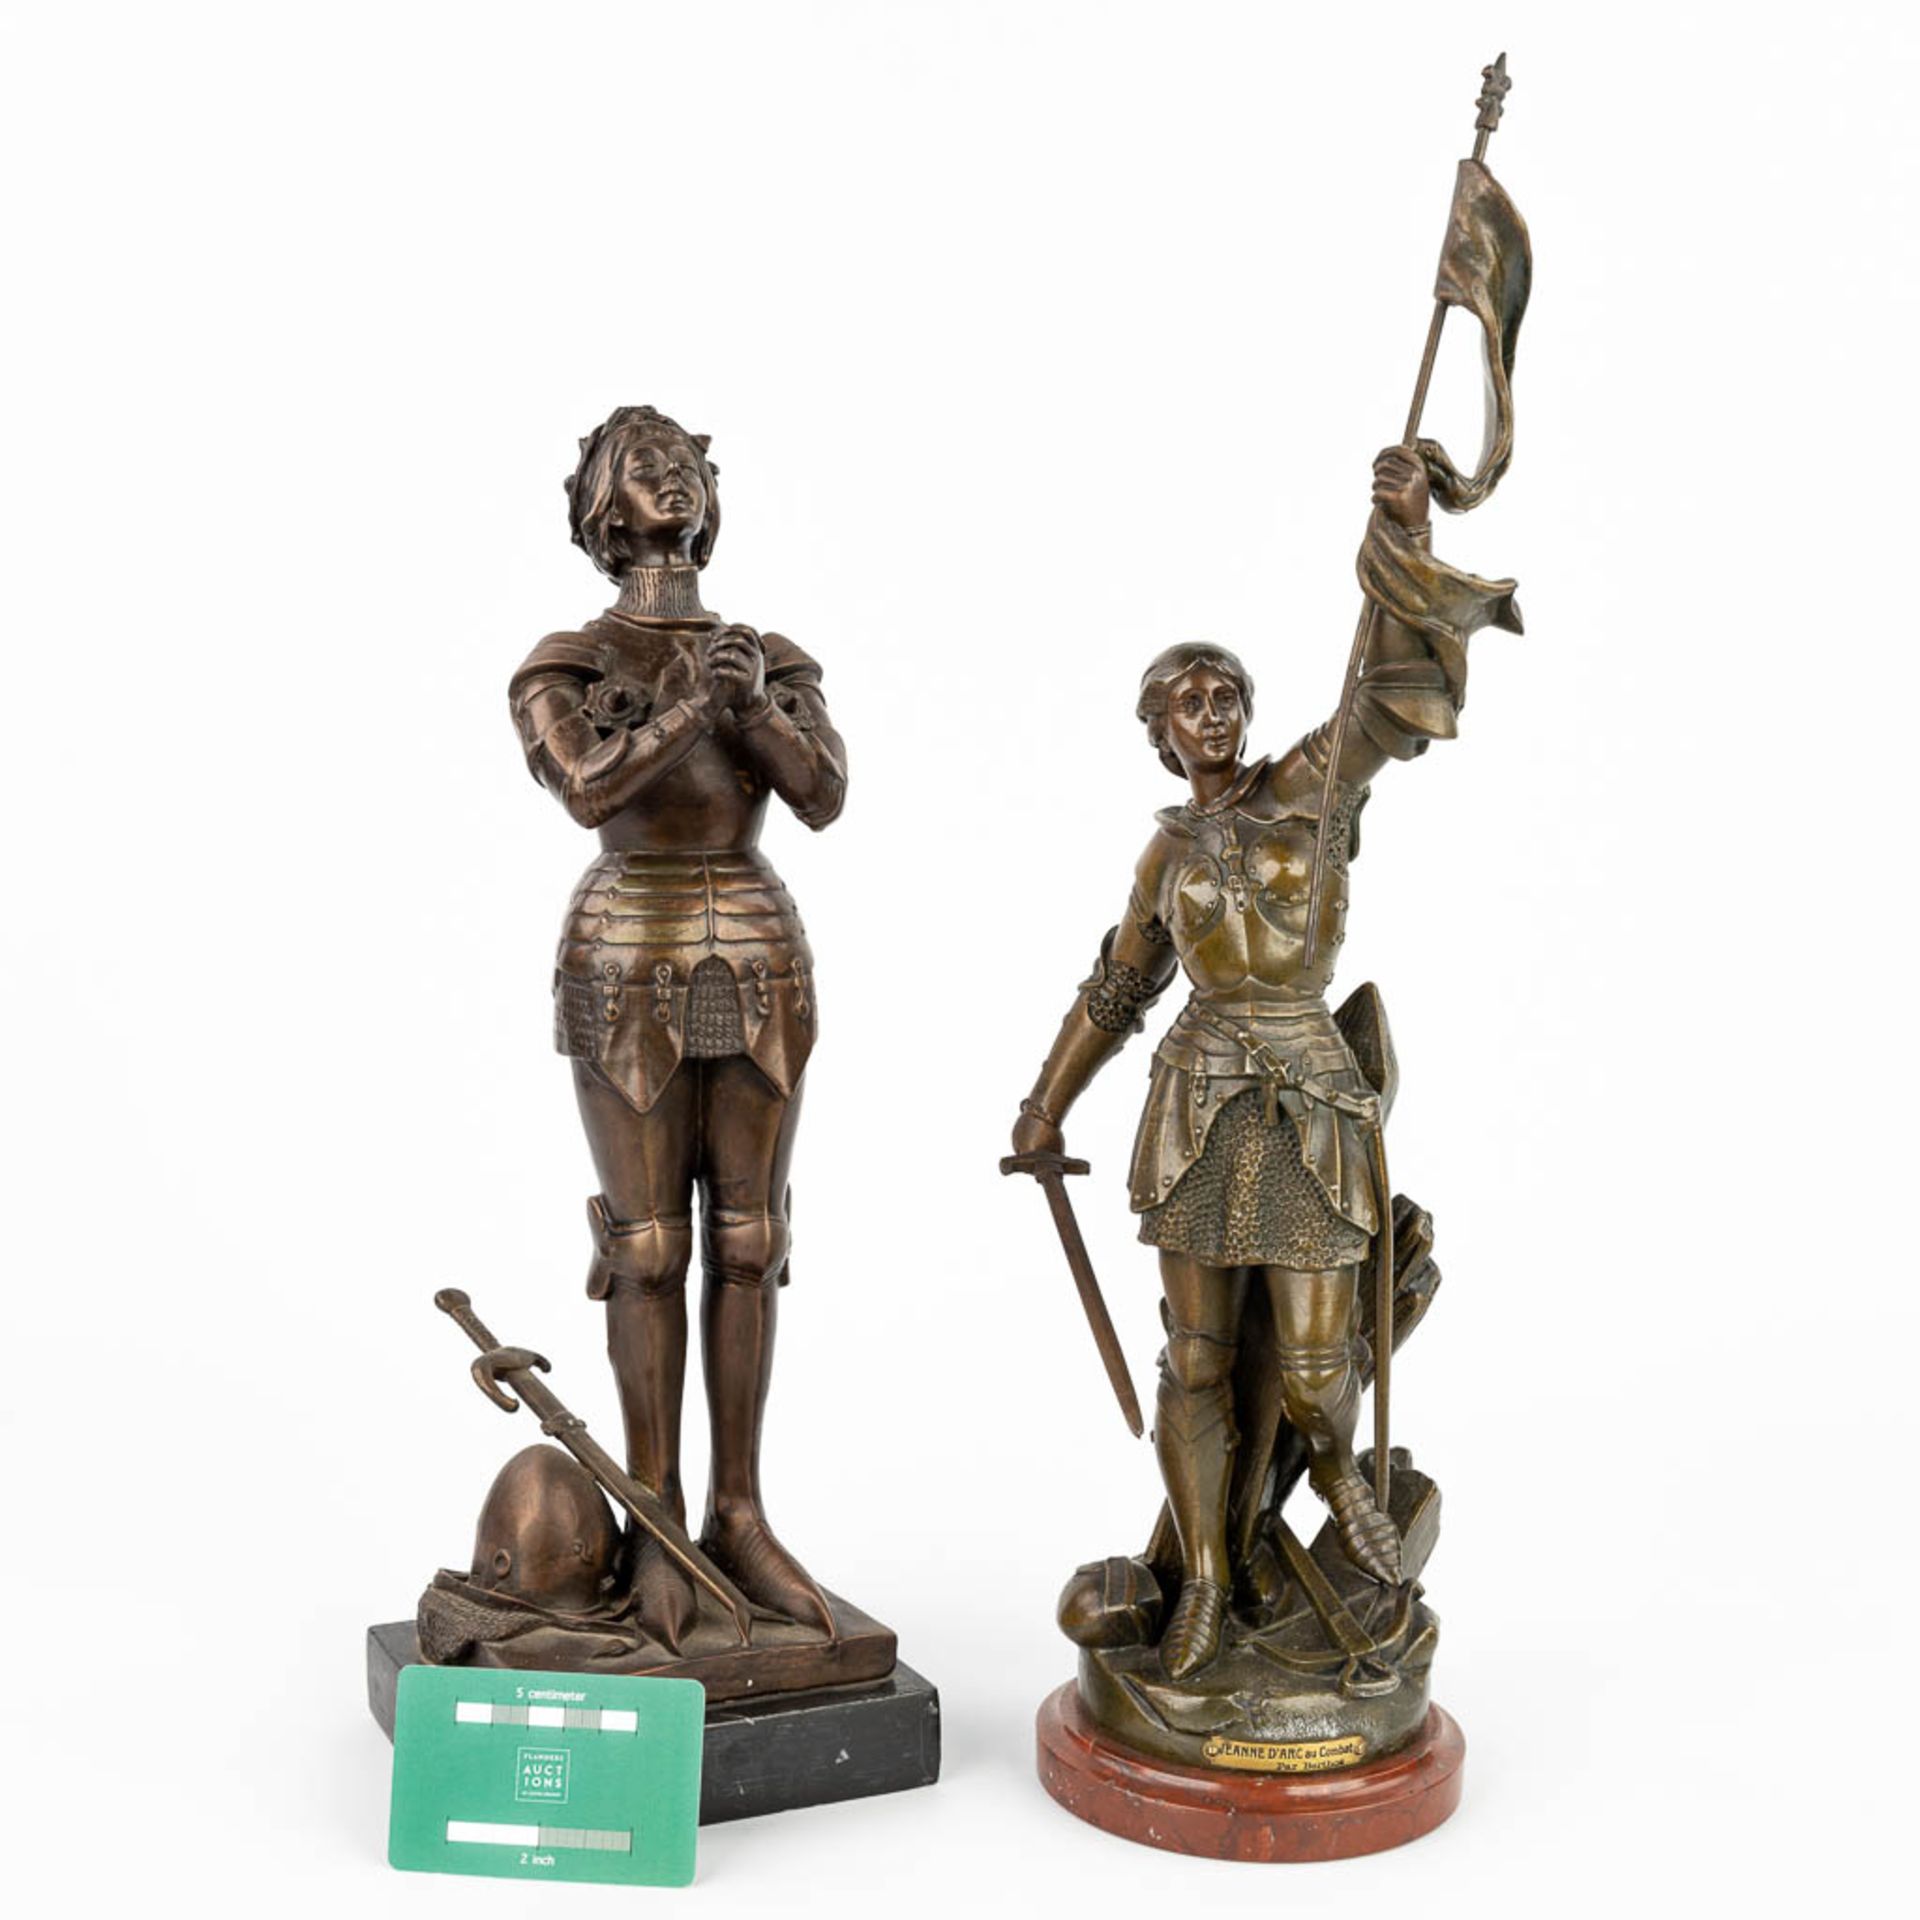 A collection of 2 statues of Jeanne D'arc made of spelter and bronze. (H:50cm) - Image 8 of 12